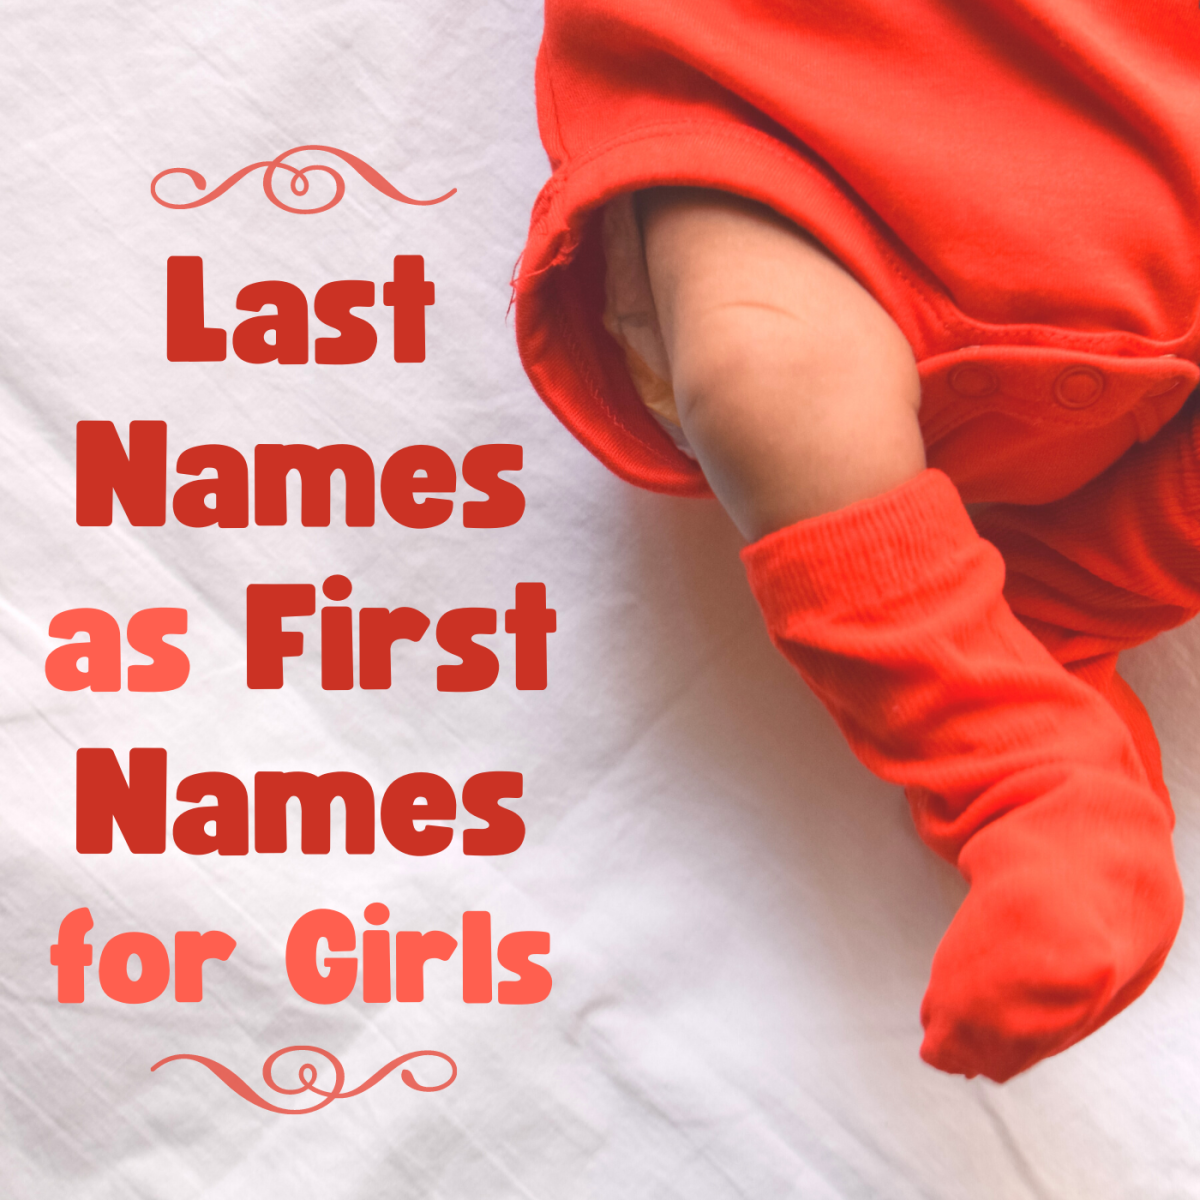 Flip things around by choosing a last name as your daughter's first name!